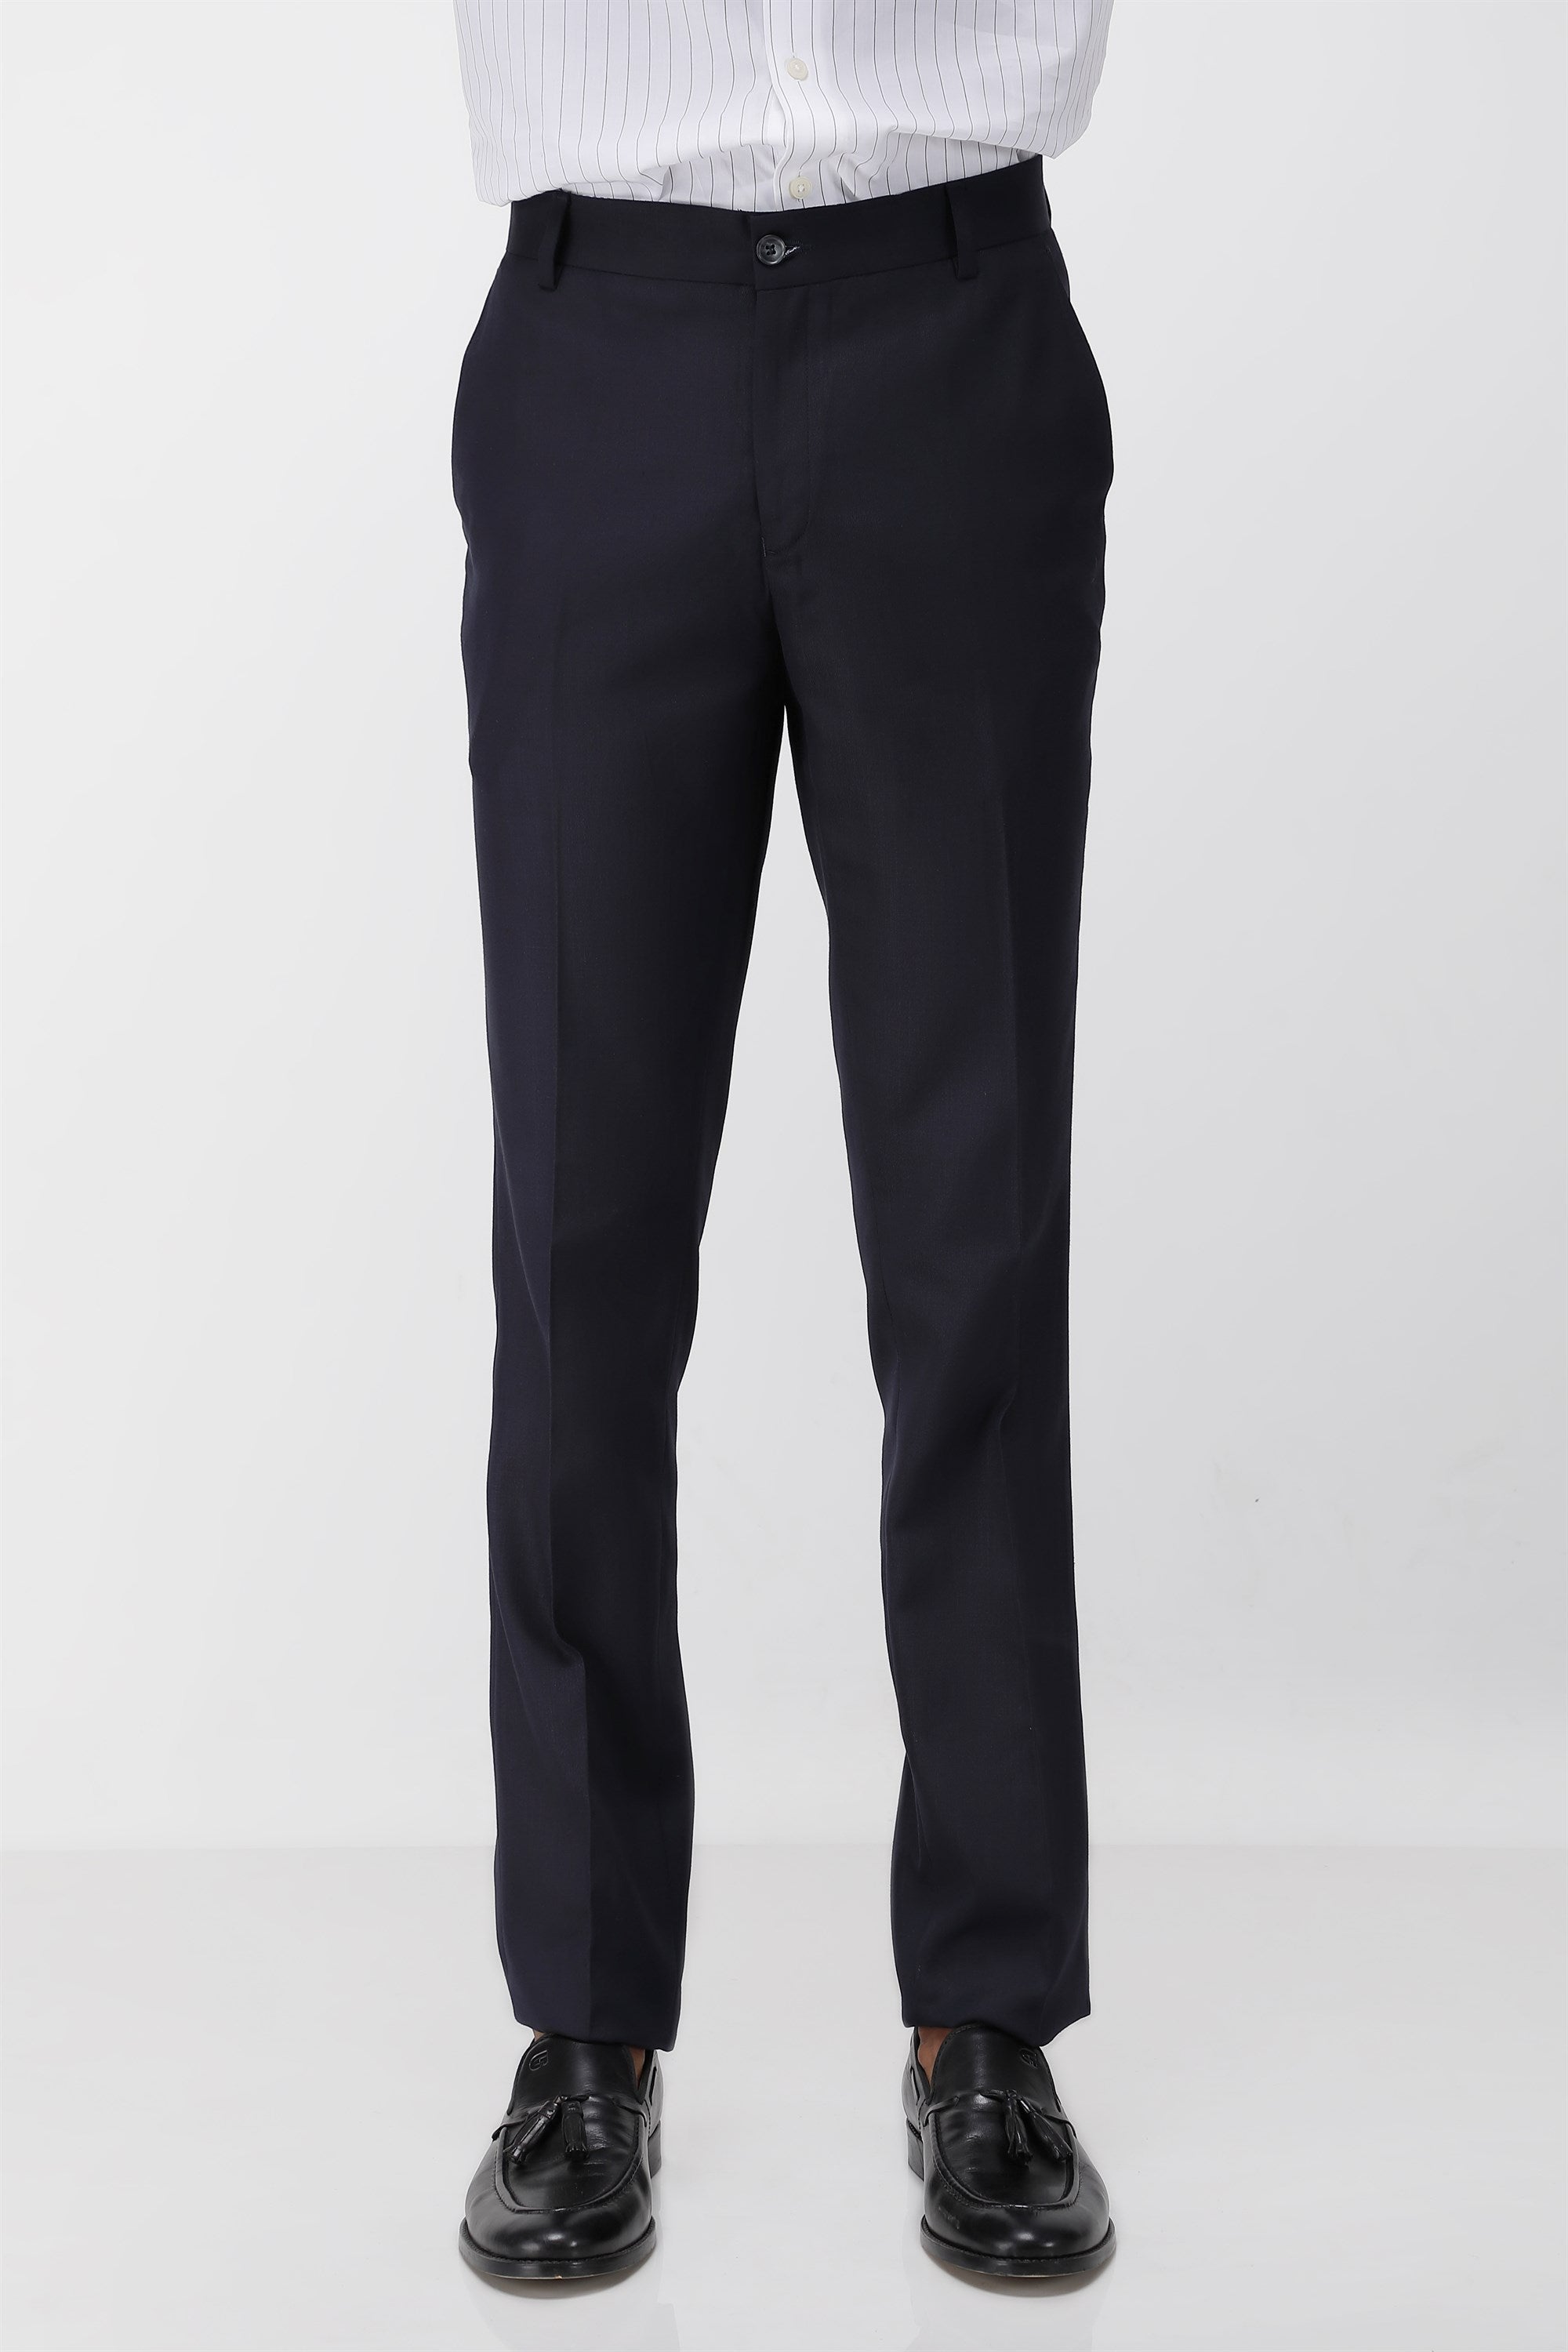 T the brand Formal Twill Flat Front Trouser - Navy Blue